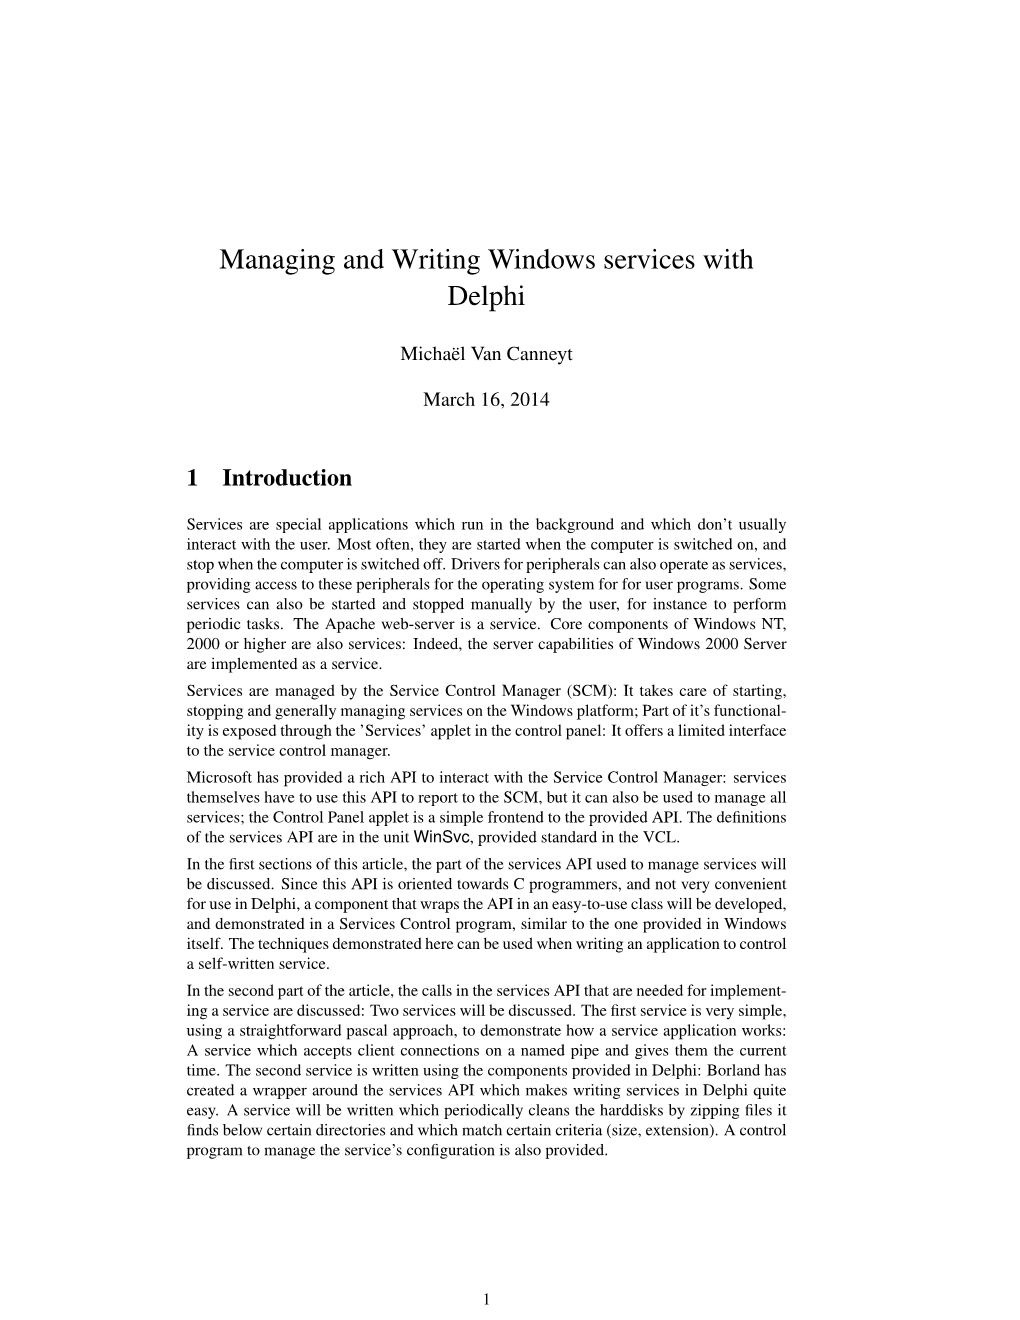 Managing and Writing Windows Services with Delphi